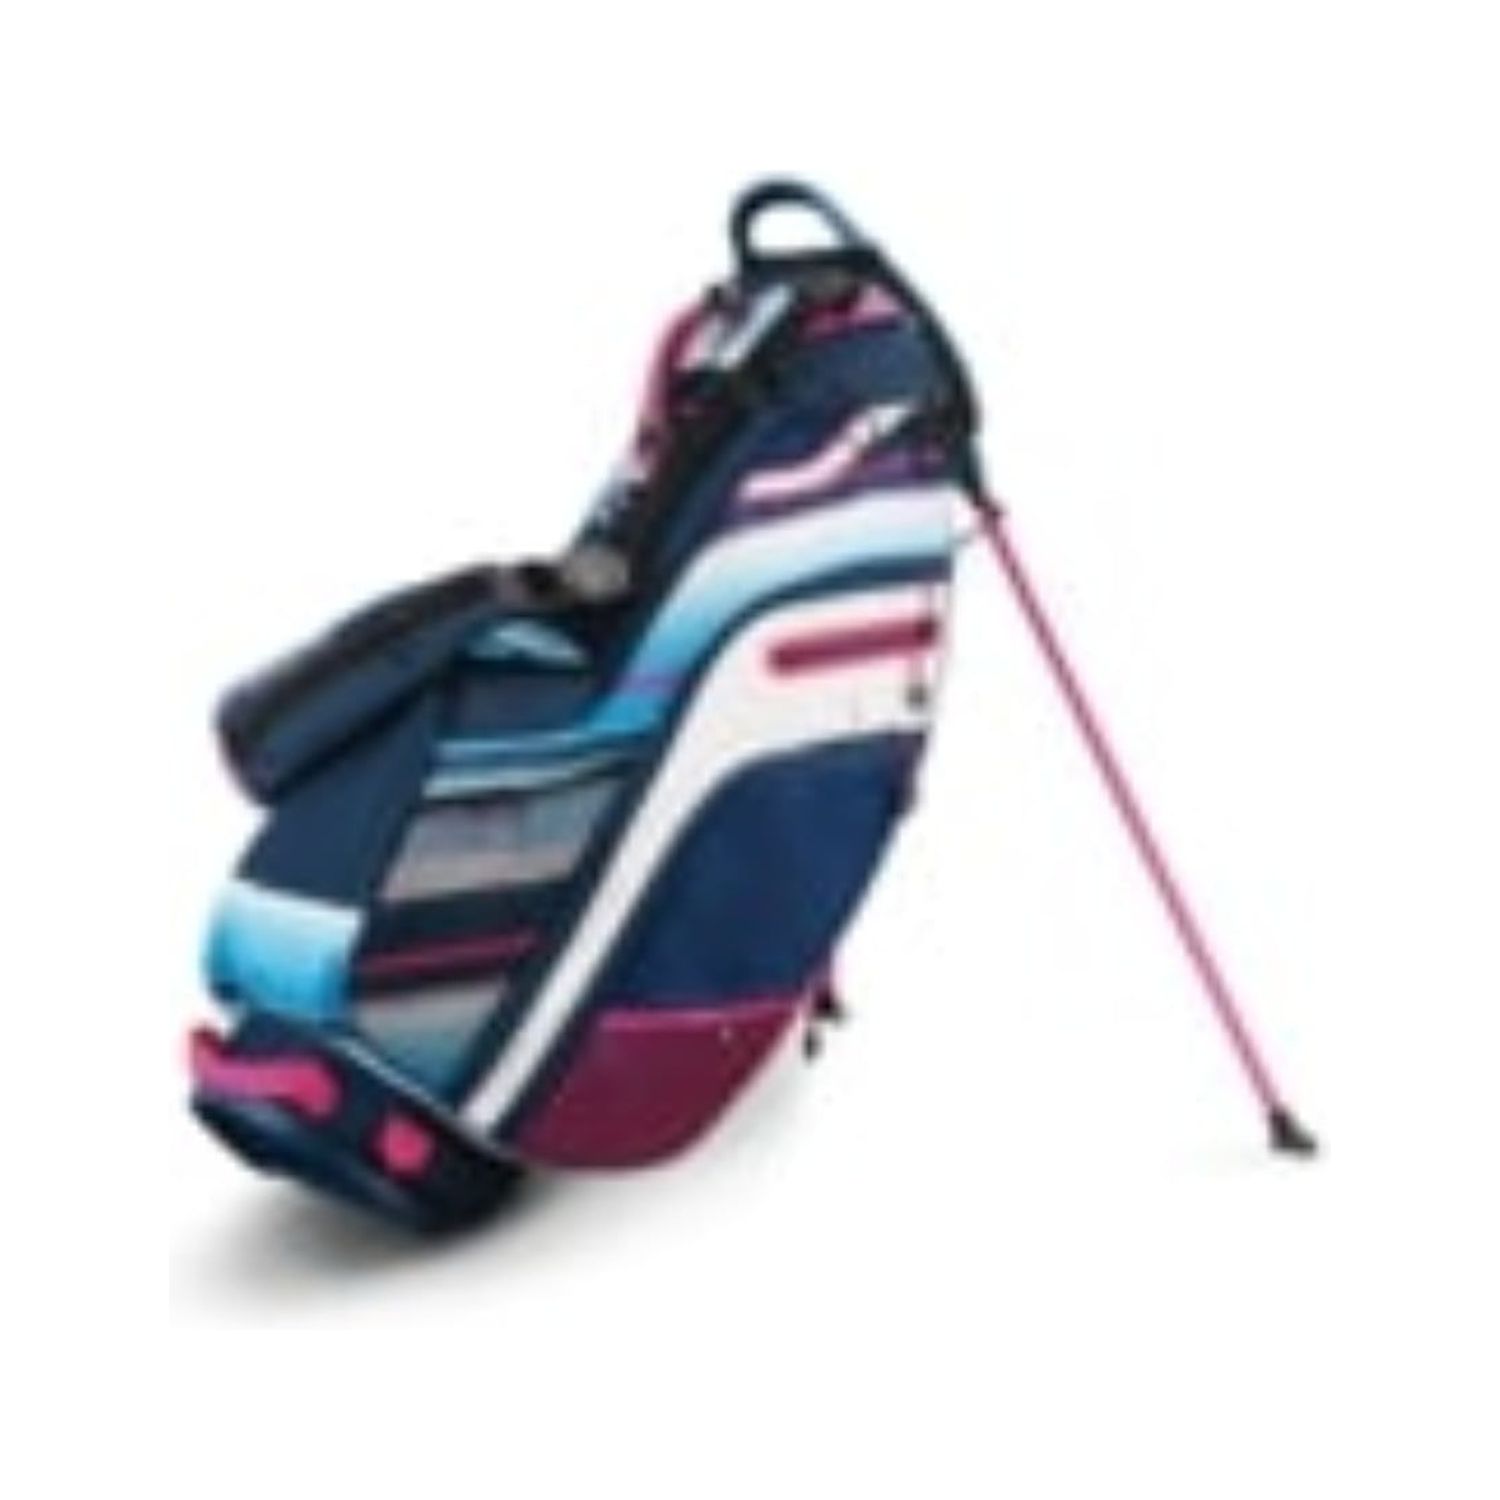 Callaway Fusion 14 Golf Stand Bag Navy/White/Pink - image 1 of 2